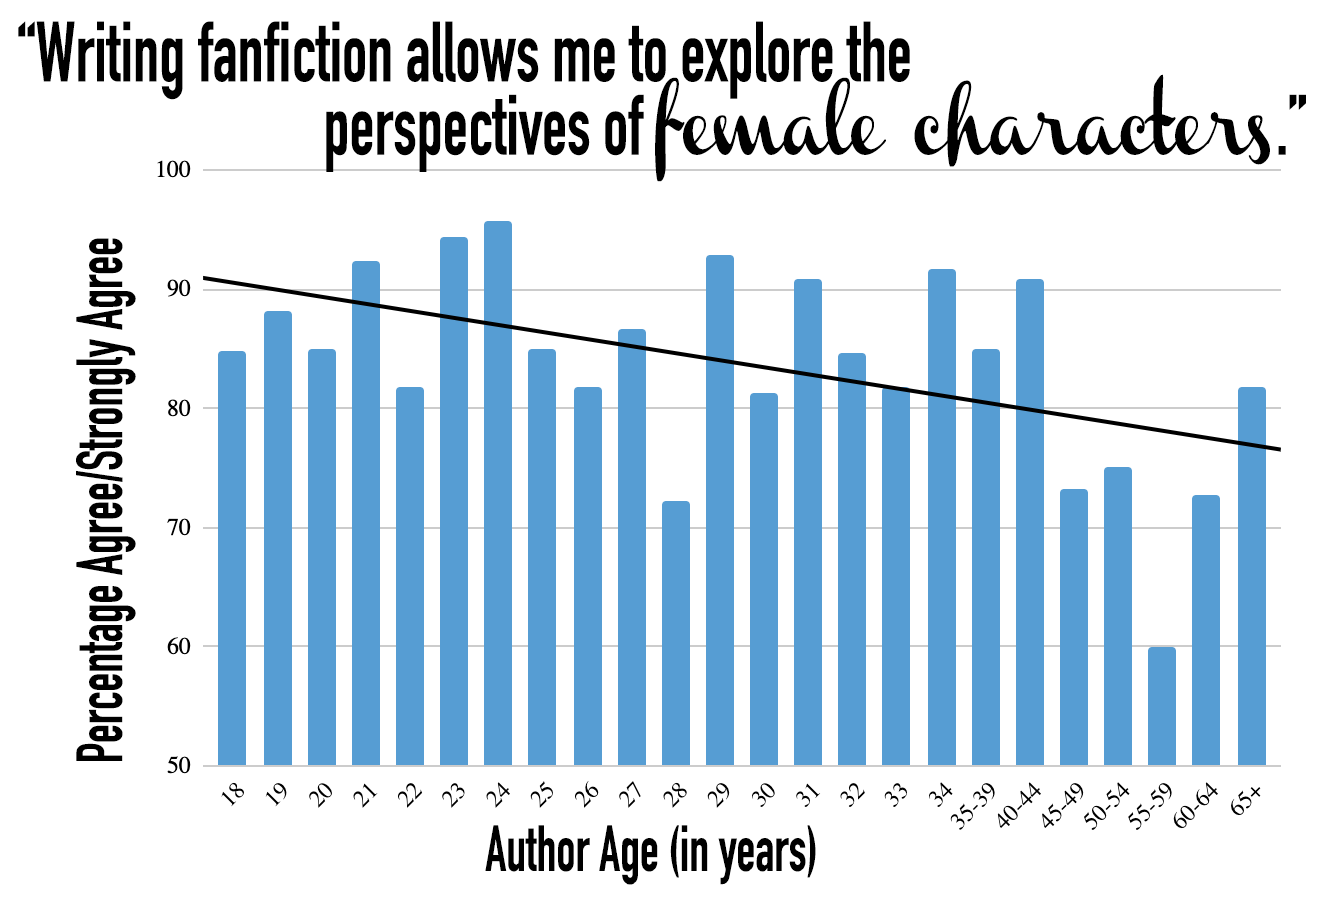 "Writing fanfiction allows me to explore the perspective of female characters." Bar graph shows the percentage who agree by age with a line of best fit showing a decrease in agreement for older authors.